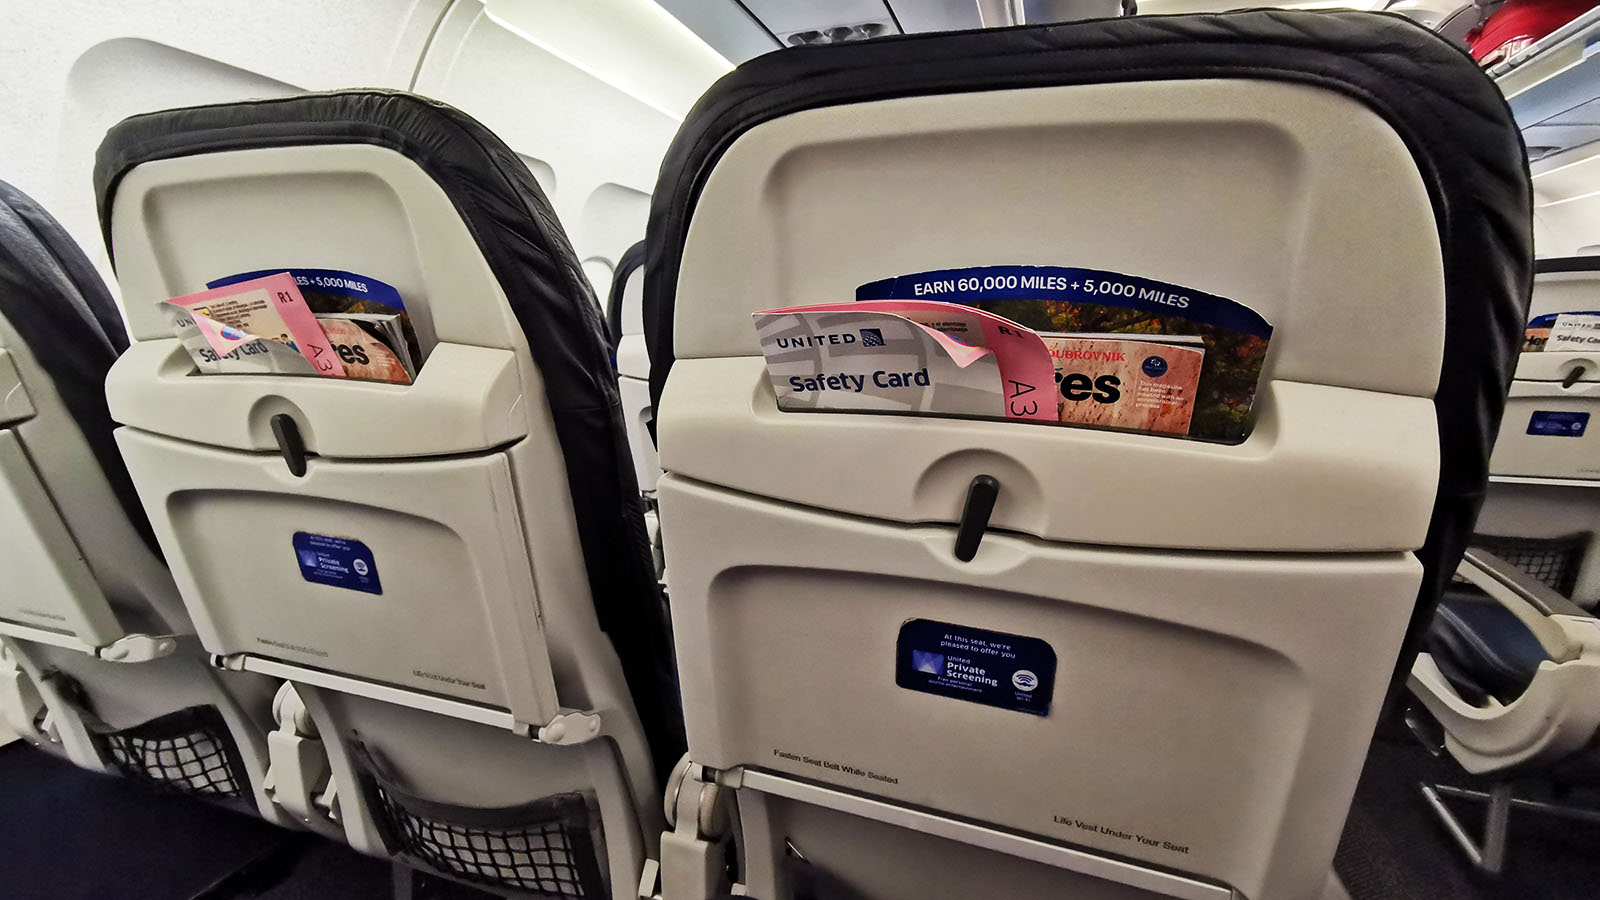 Literature pocket on United Airlines' Airbus A319